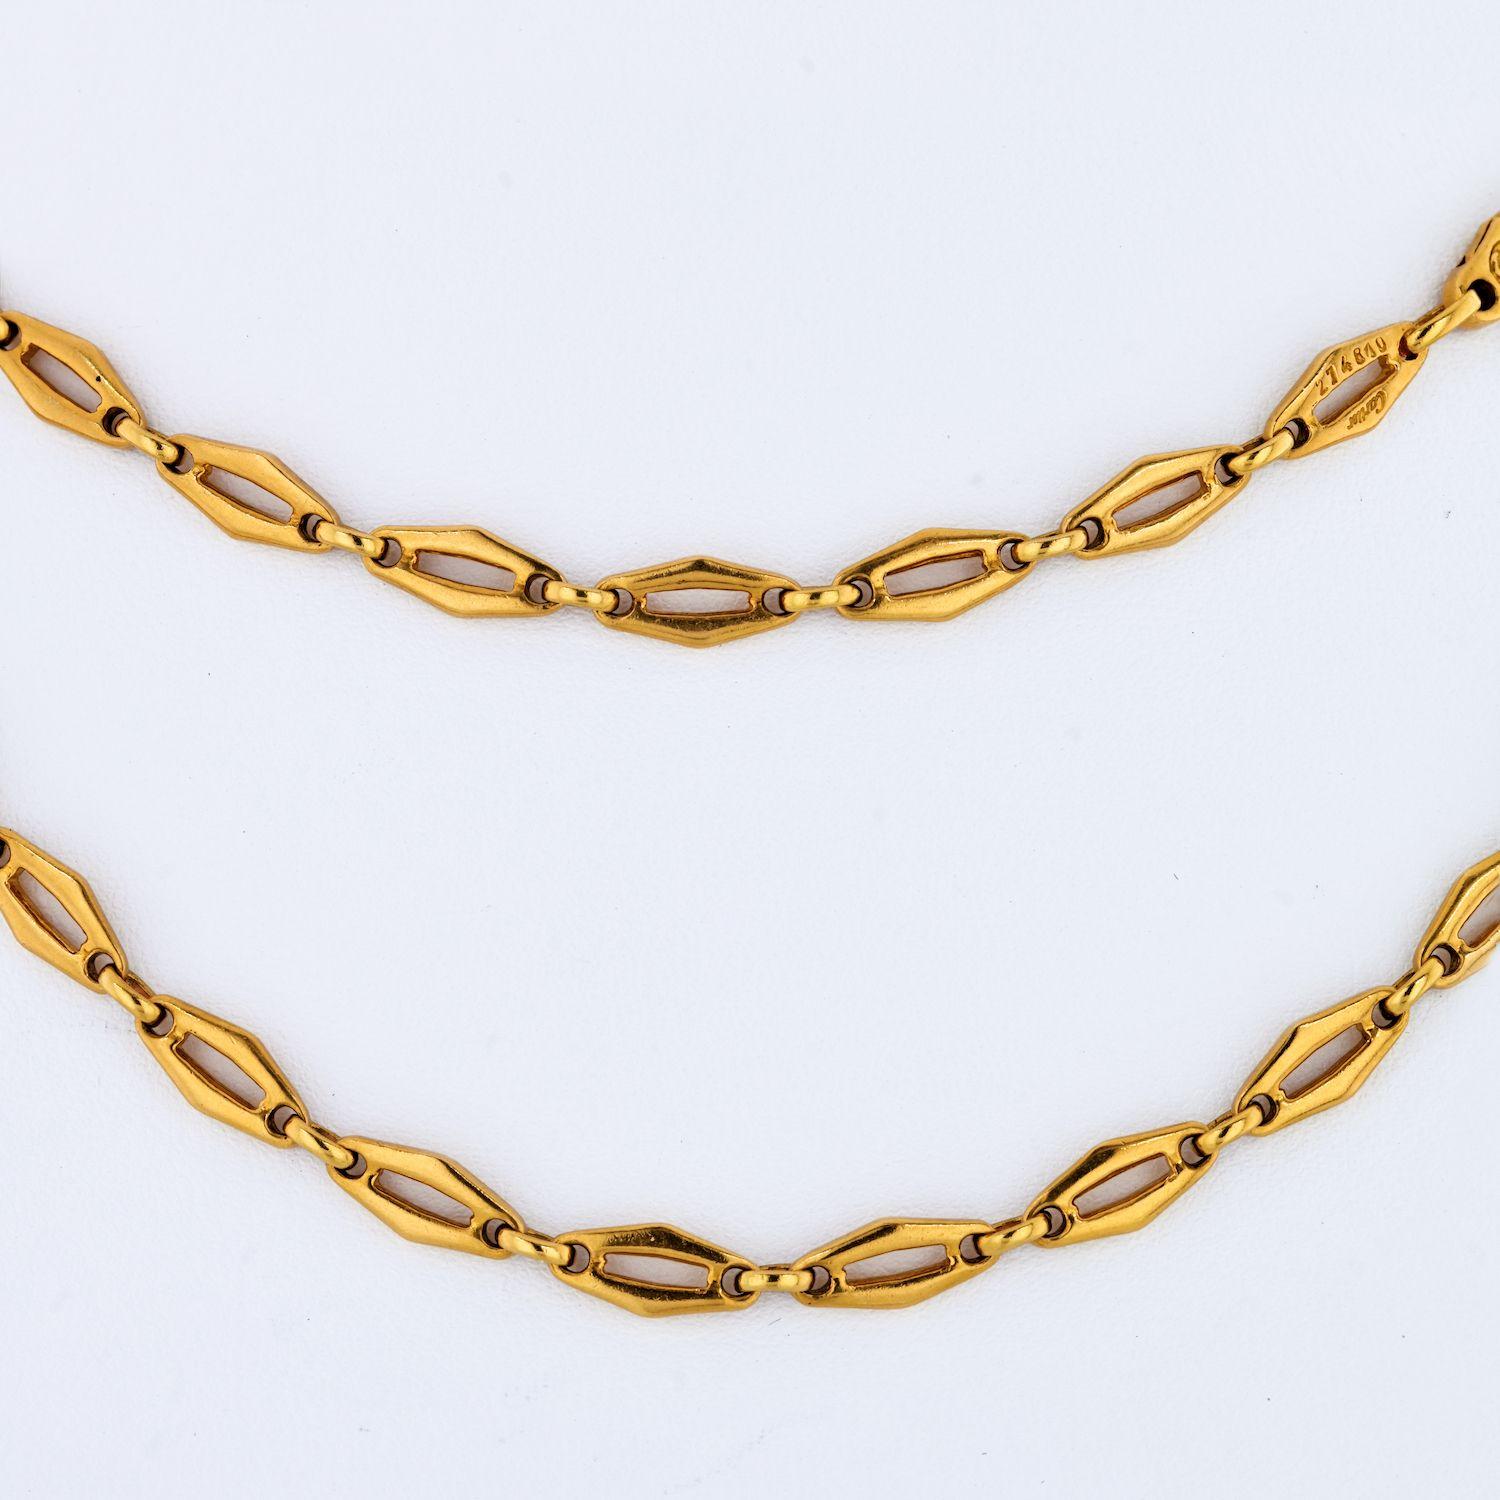 In excellent condition this rare and vintage Cartier logo chain necklace. Measures 32 inches long.  
